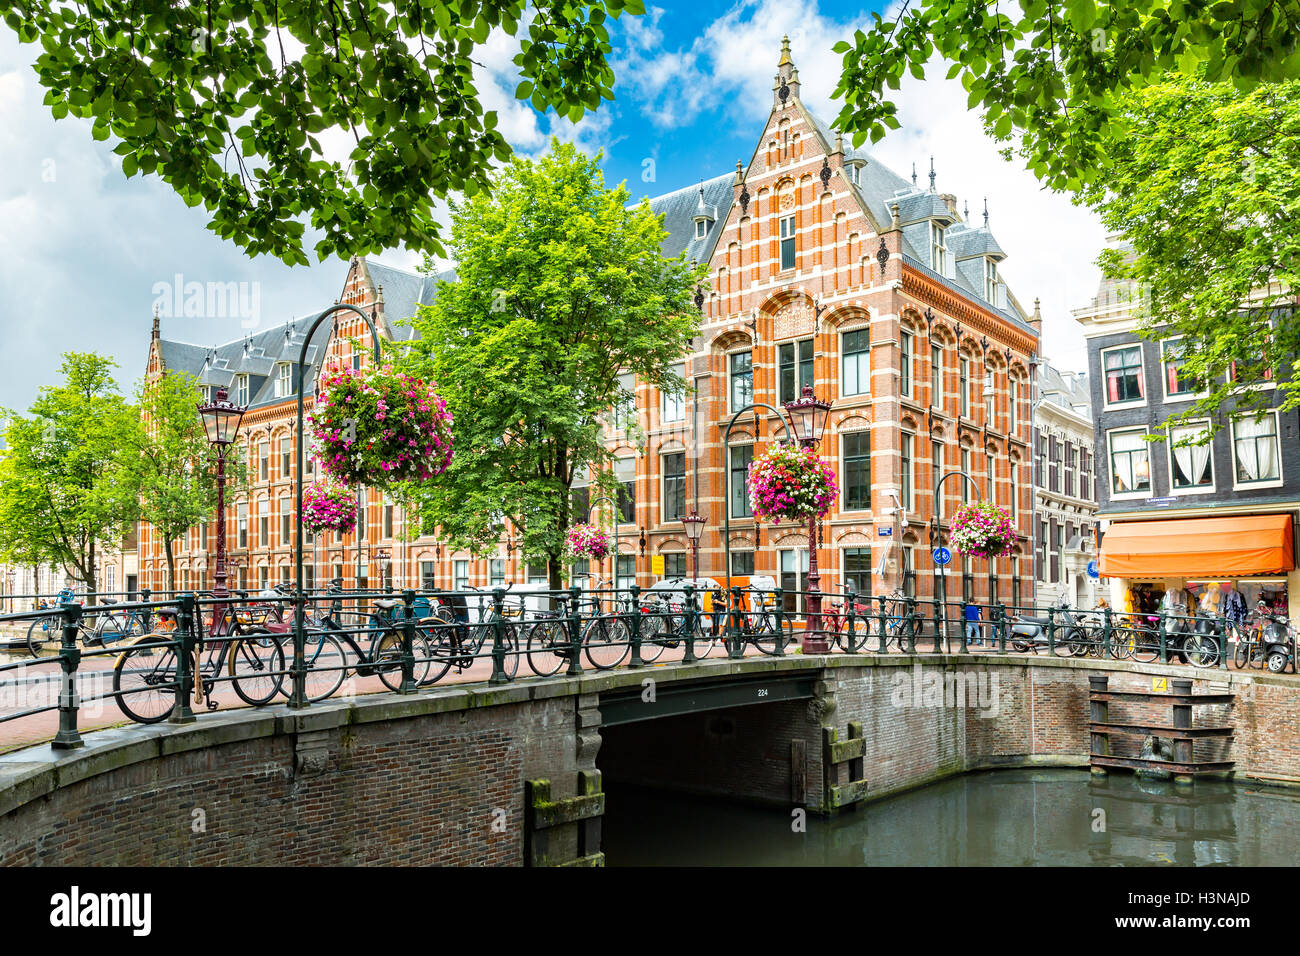 Typical canal side cityscape of Amsterdam Stock Photo